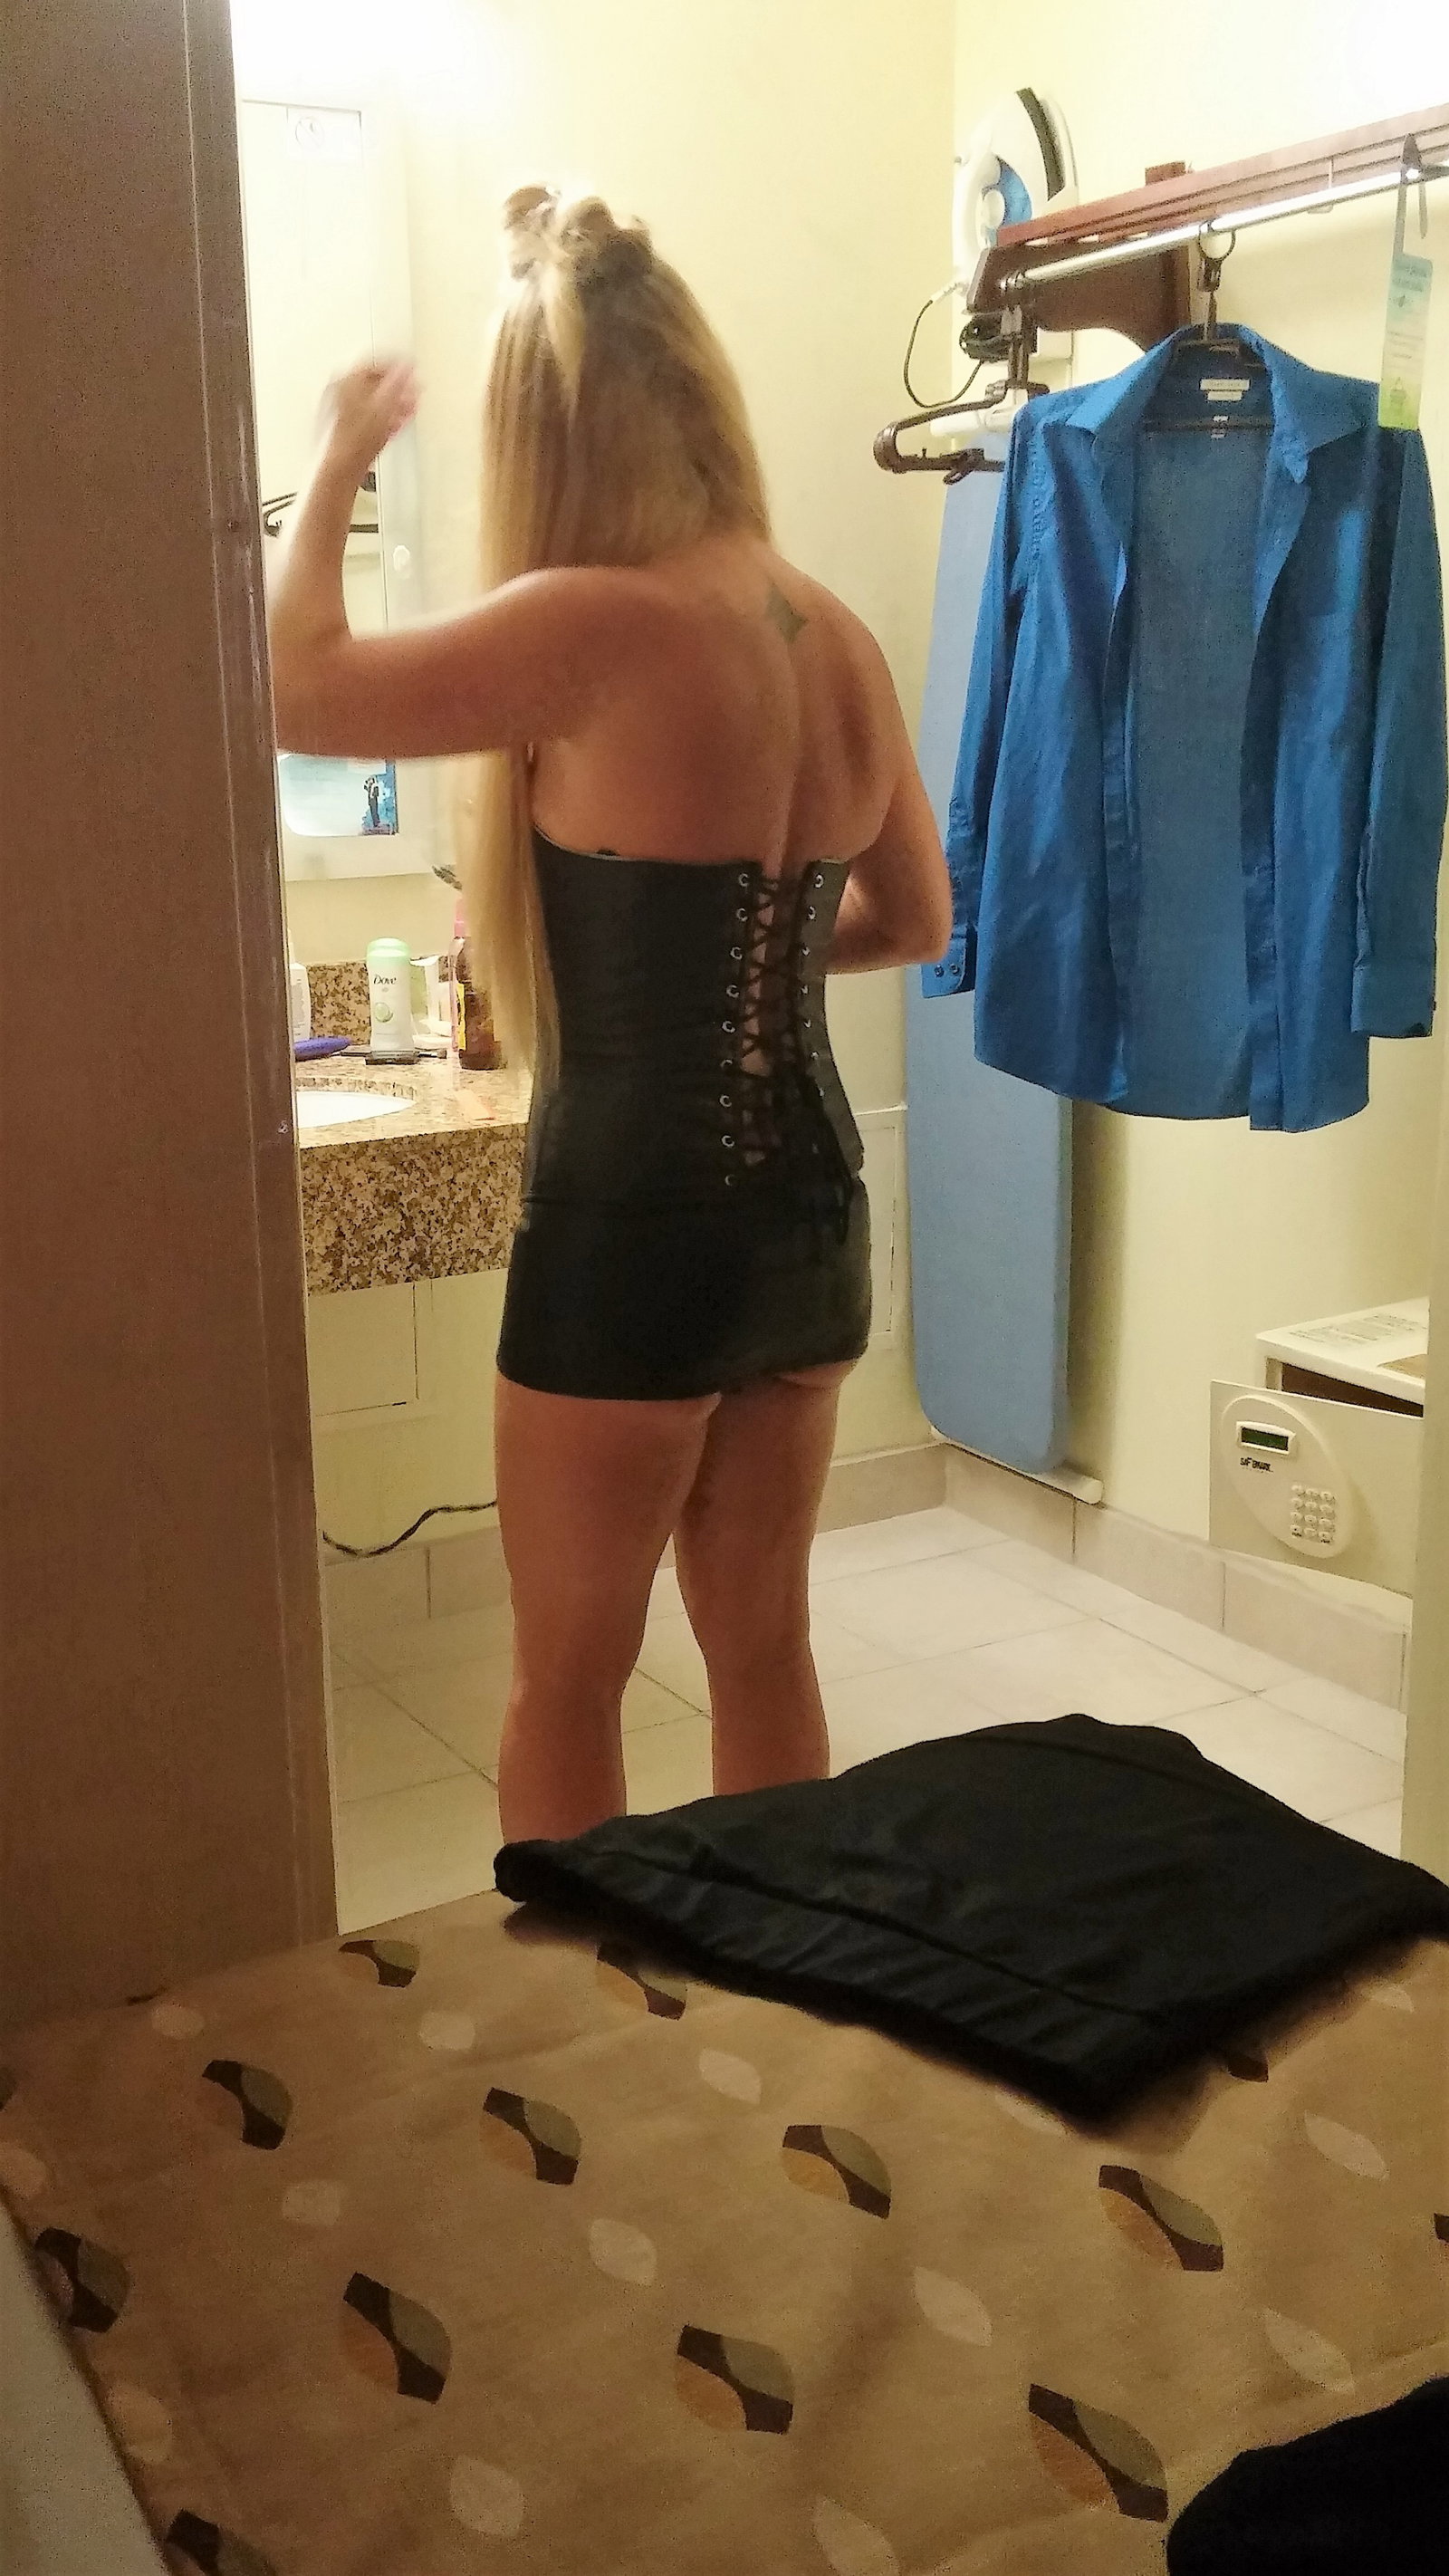 Photo by Mandrplaytime with the username @Mandrplaytime, who is a verified user,  April 2, 2019 at 10:19 PM. The post is about the topic Hotwife and the text says 'Getting ready'